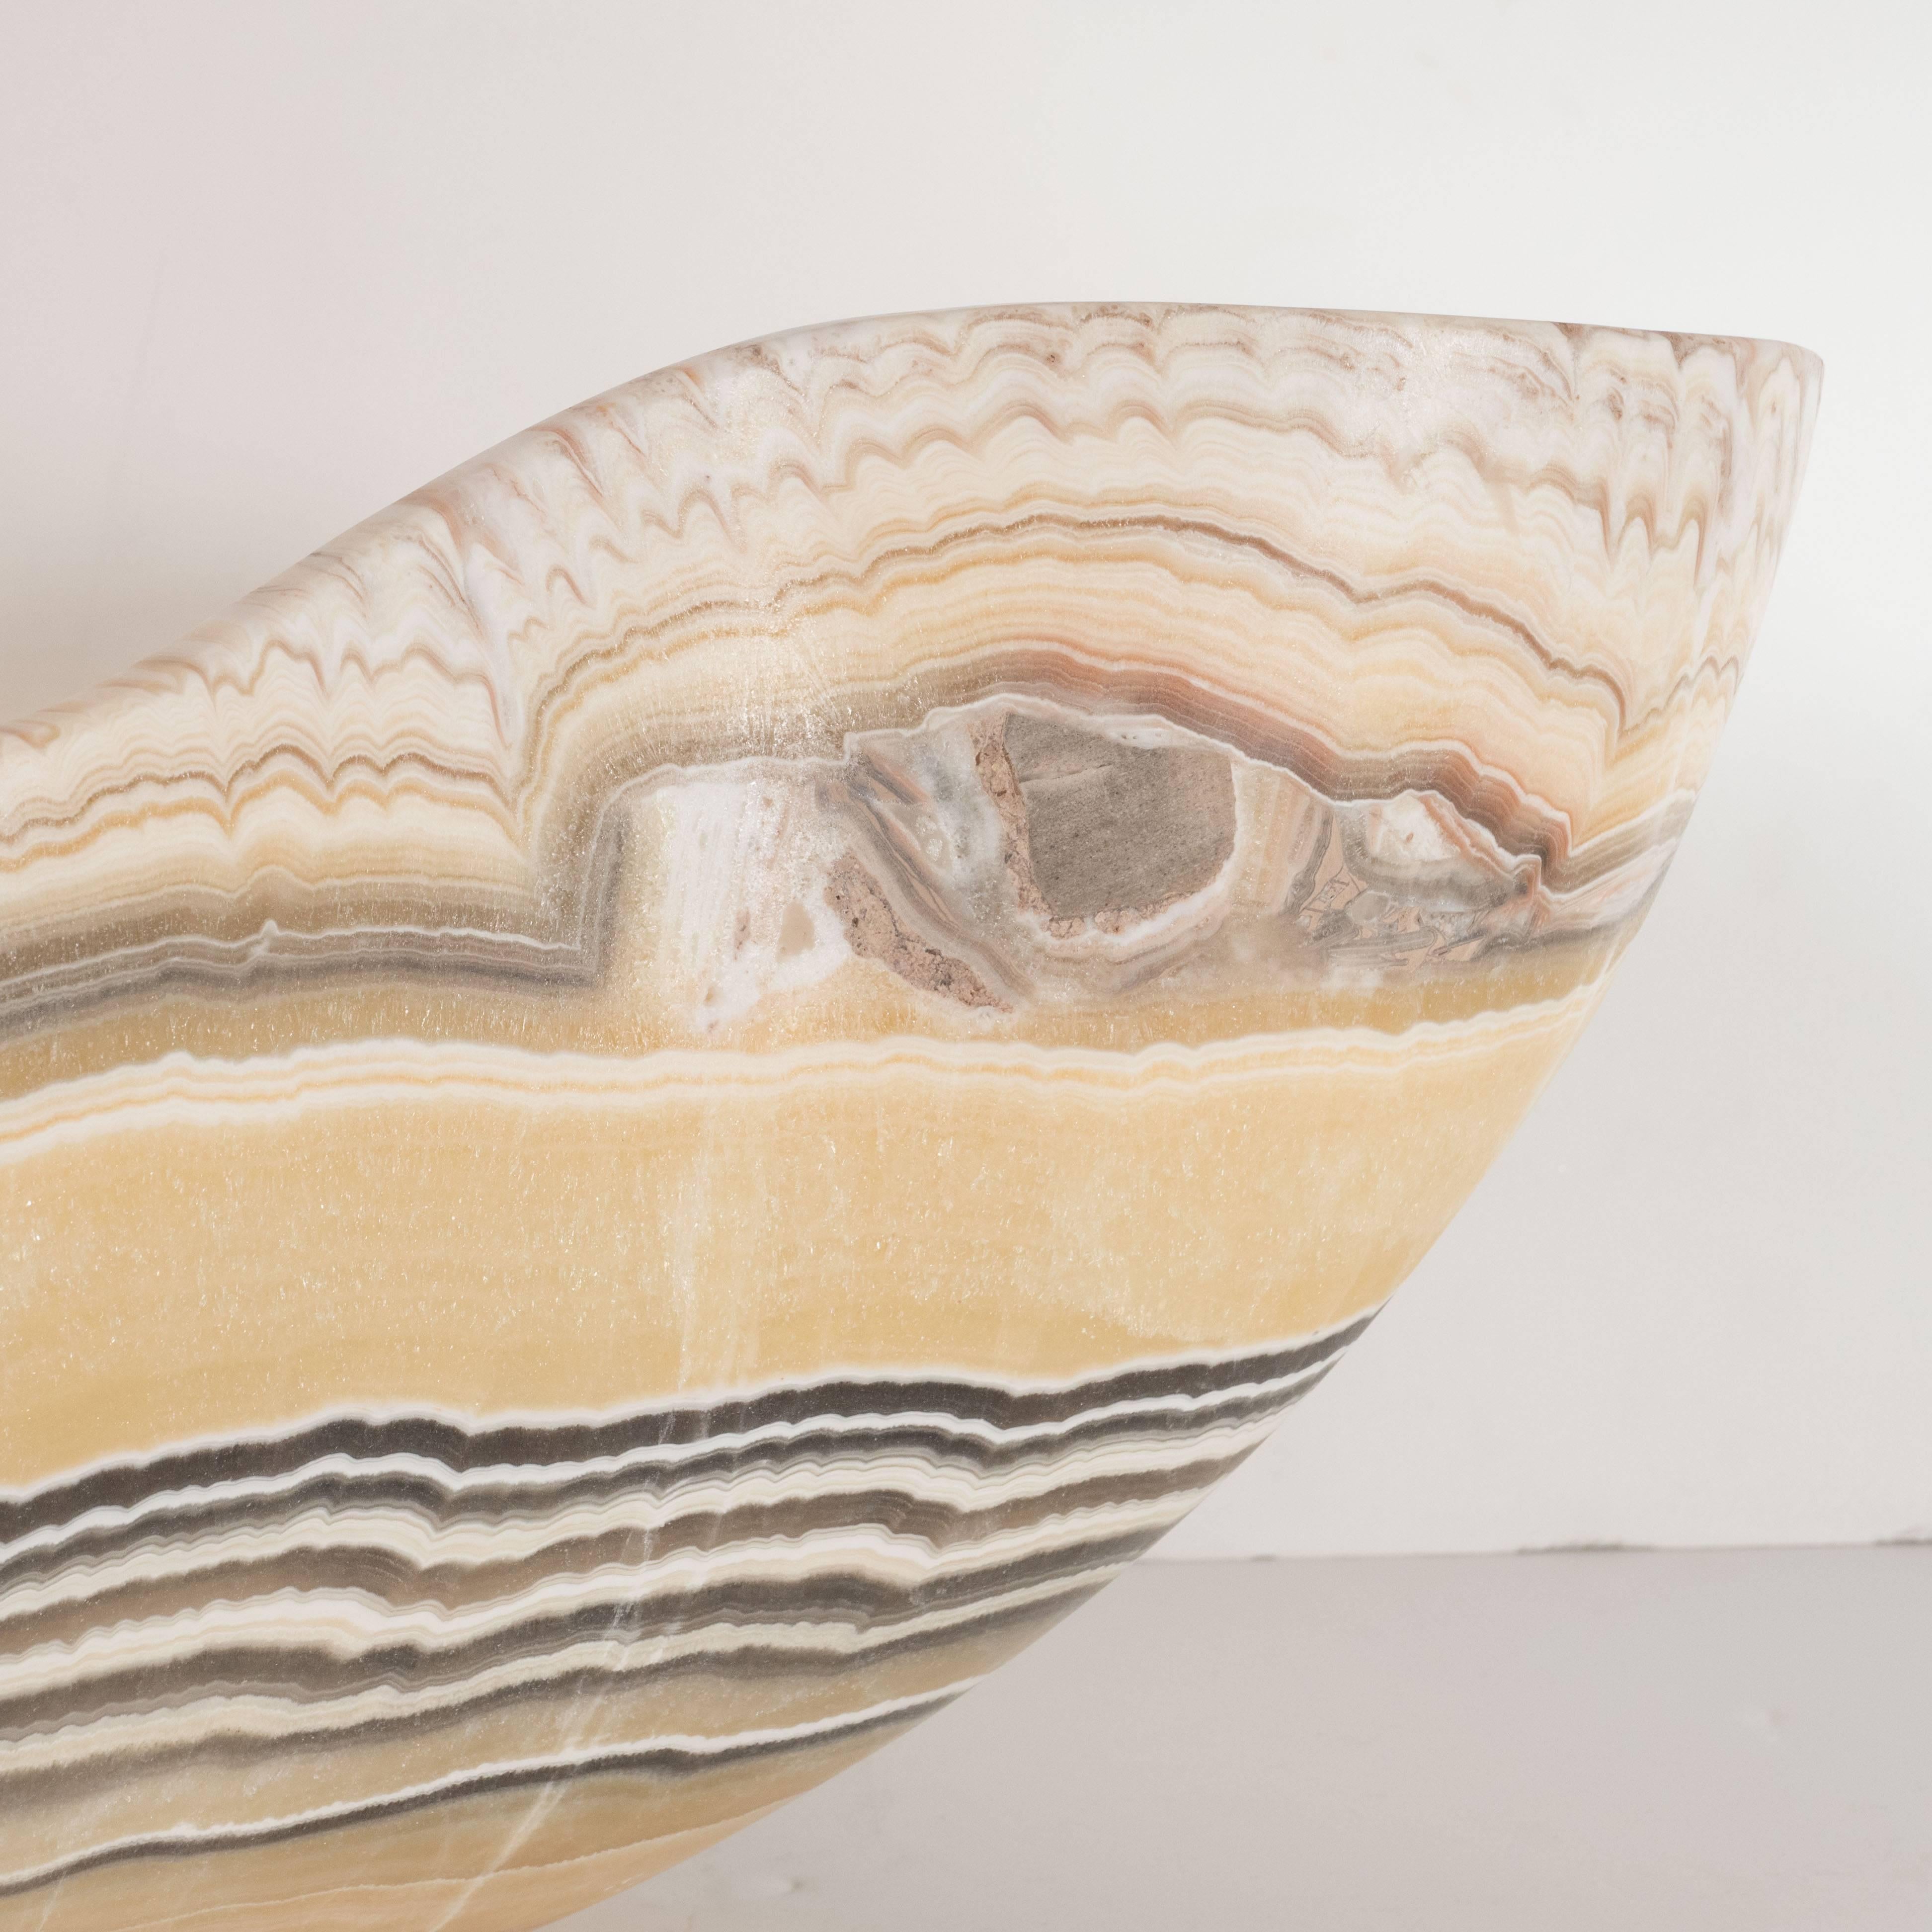 Organic Modern Agate Bowl with Grisaille Bands against a Honeyed Background 3